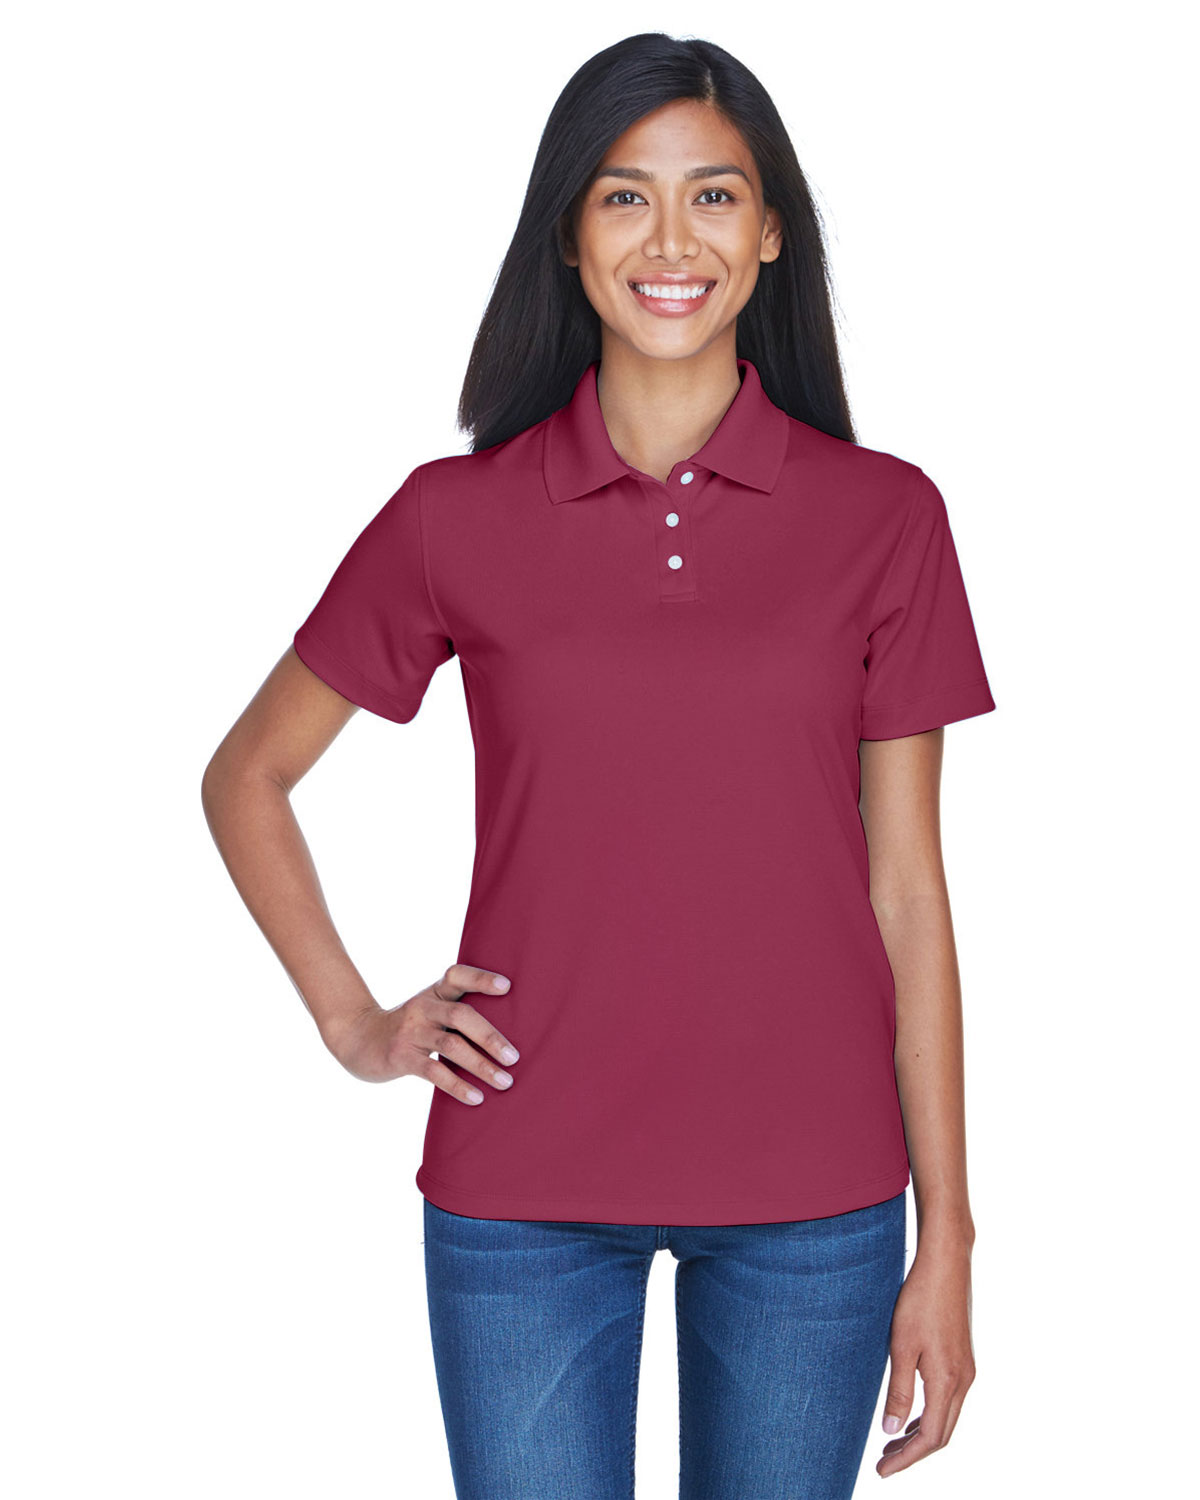 Ultraclub 8445L Women Cool & Dry Stain-Release Performance Polo at Apparelstation